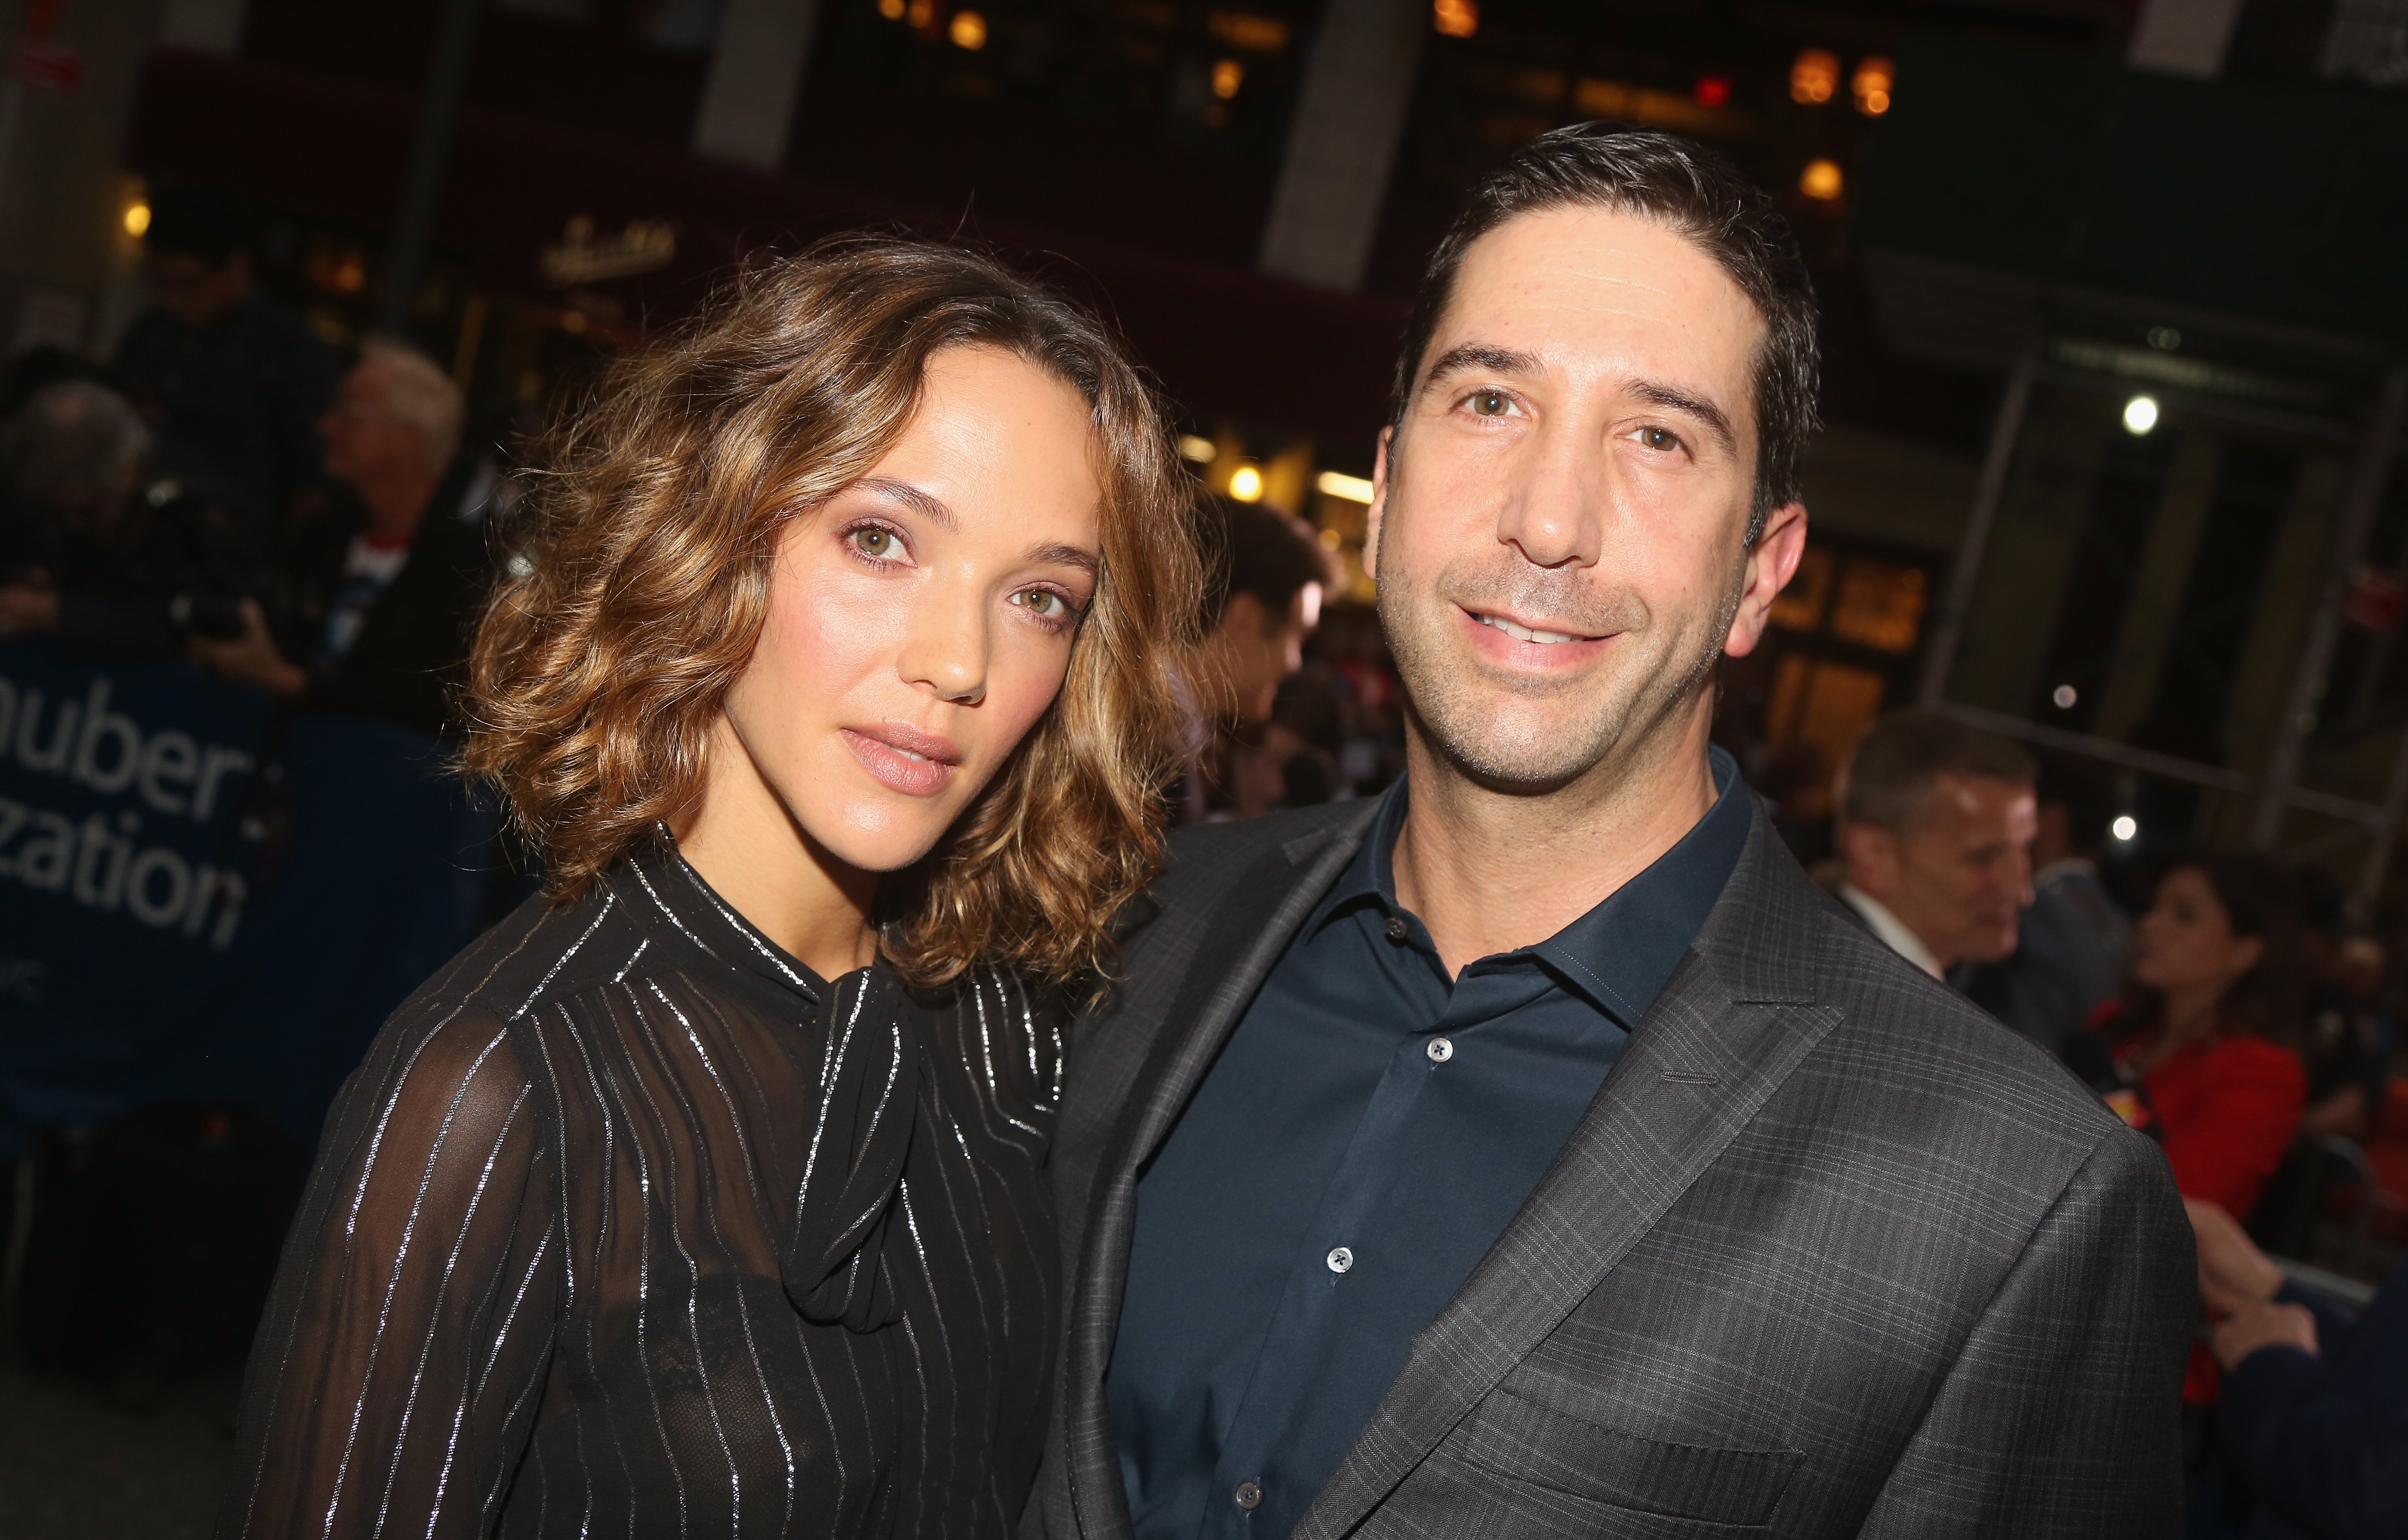 Zoë Buckman and David Schwimmer at the opening night of "The Front Page" on Broadway on October 20, 2016, in New York City. | Source: Getty Images